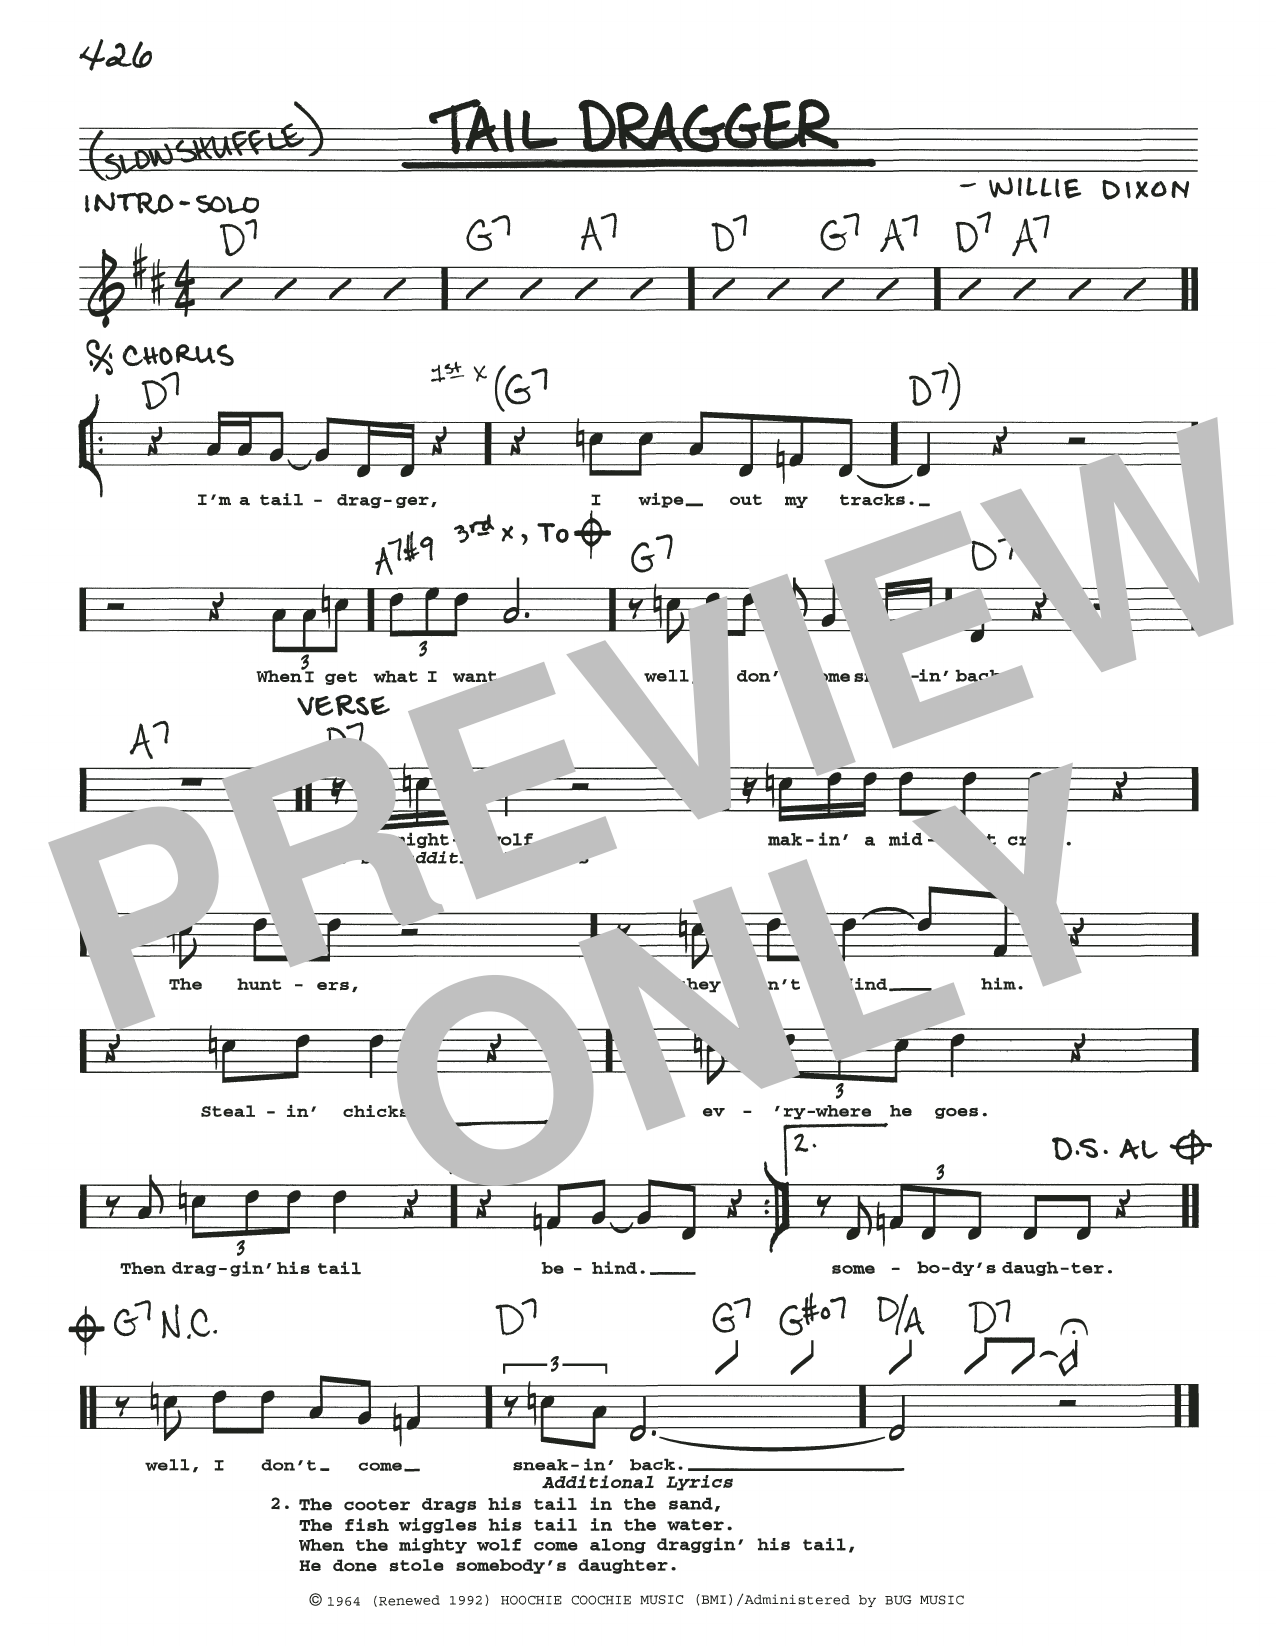 Download Howlin' Wolf Tail Dragger Sheet Music